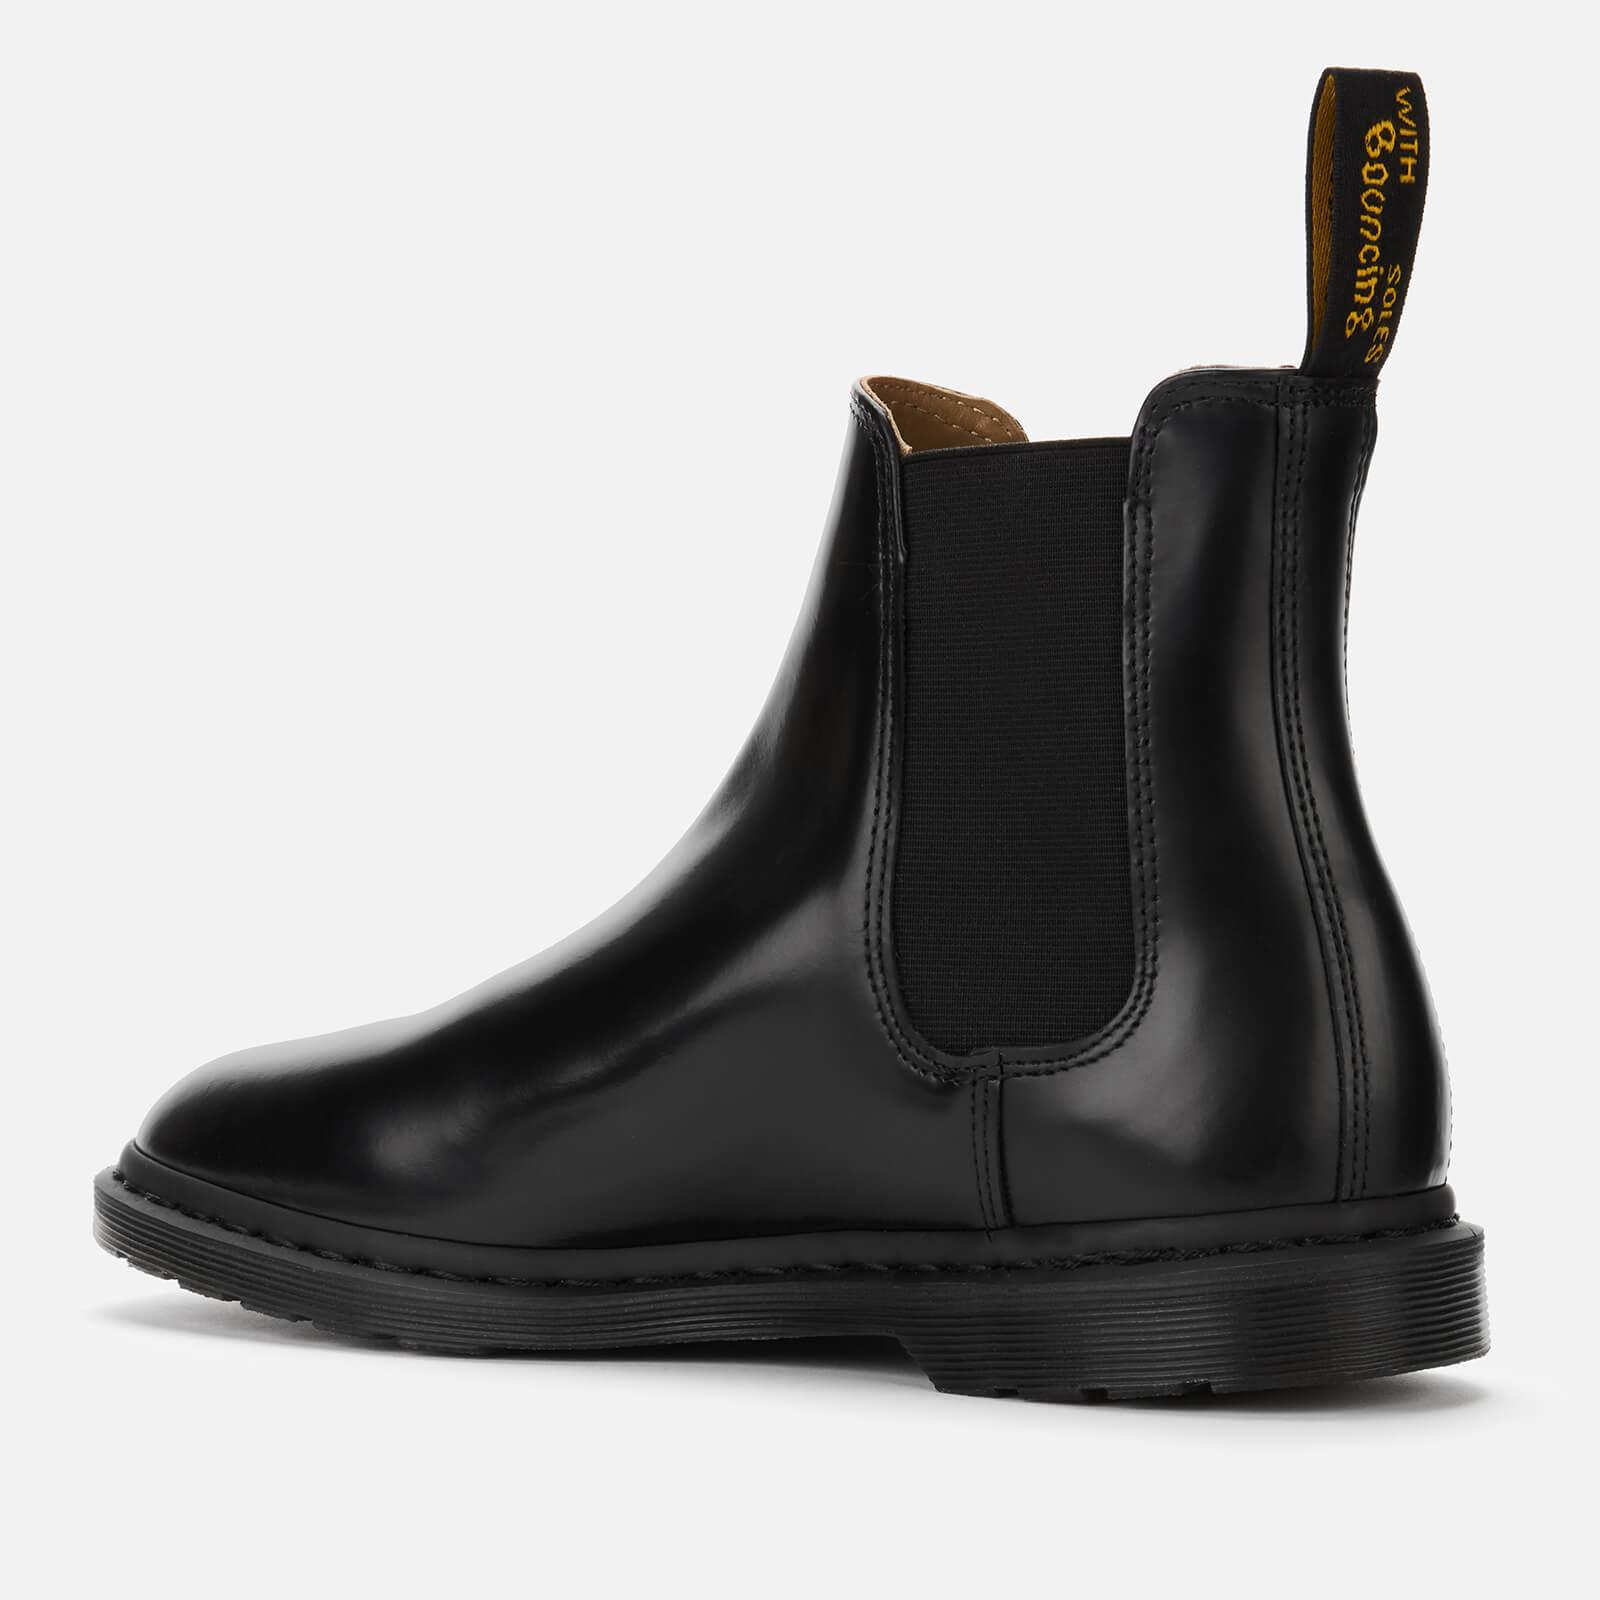 Dr. Martens Graeme Ii Polished Smooth Leather Chelsea Boots in Black for  Men - Lyst